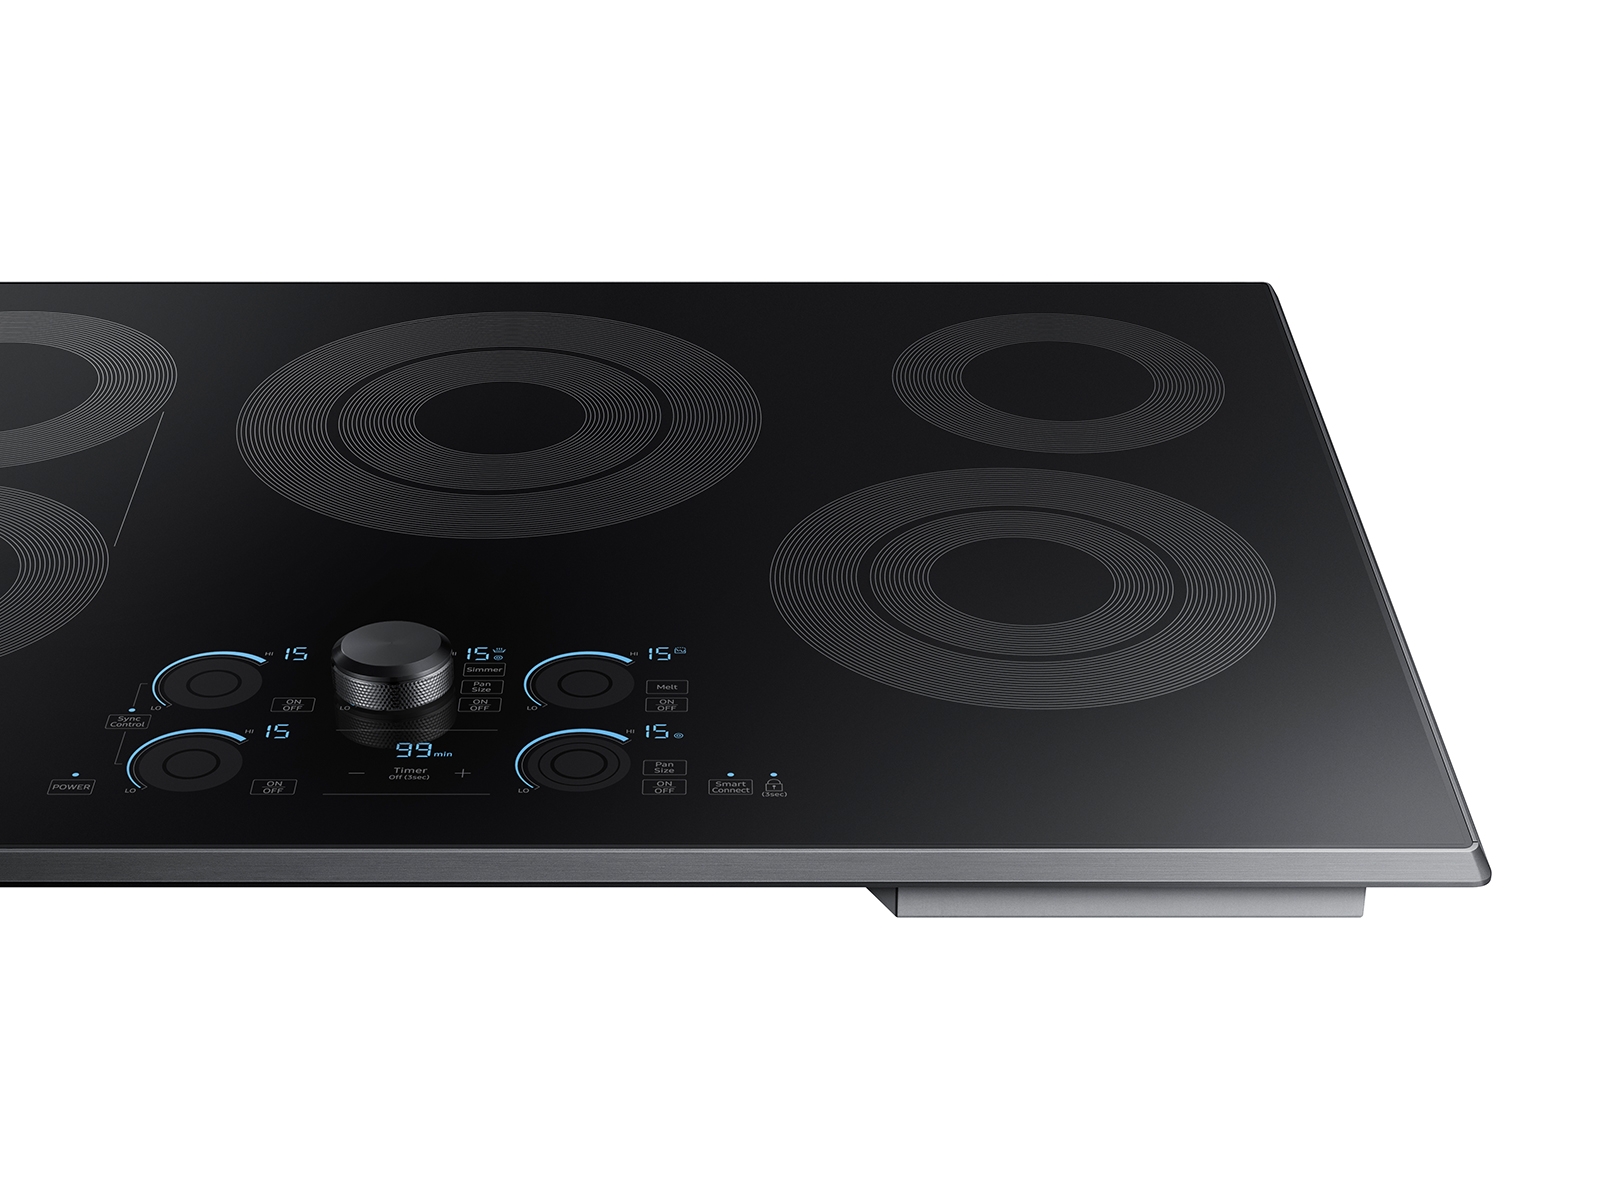 30 Smart Electric Cooktop with Sync Elements in Black Stainless Steel  Cooktop - NZ30K7570RG/AA